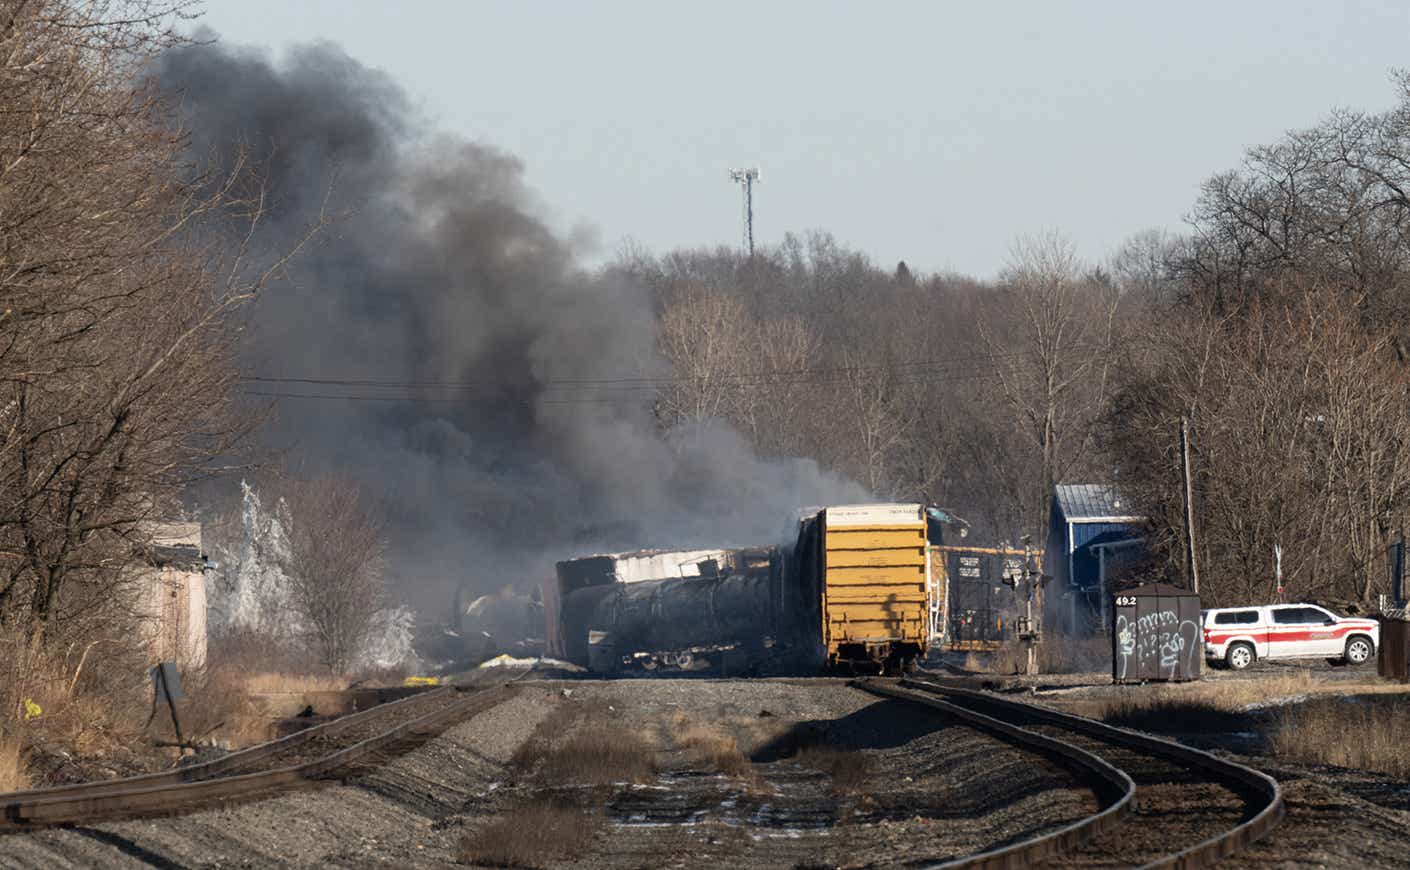 Train carrying toxic chemicals derailed in East Palestine, Ohio